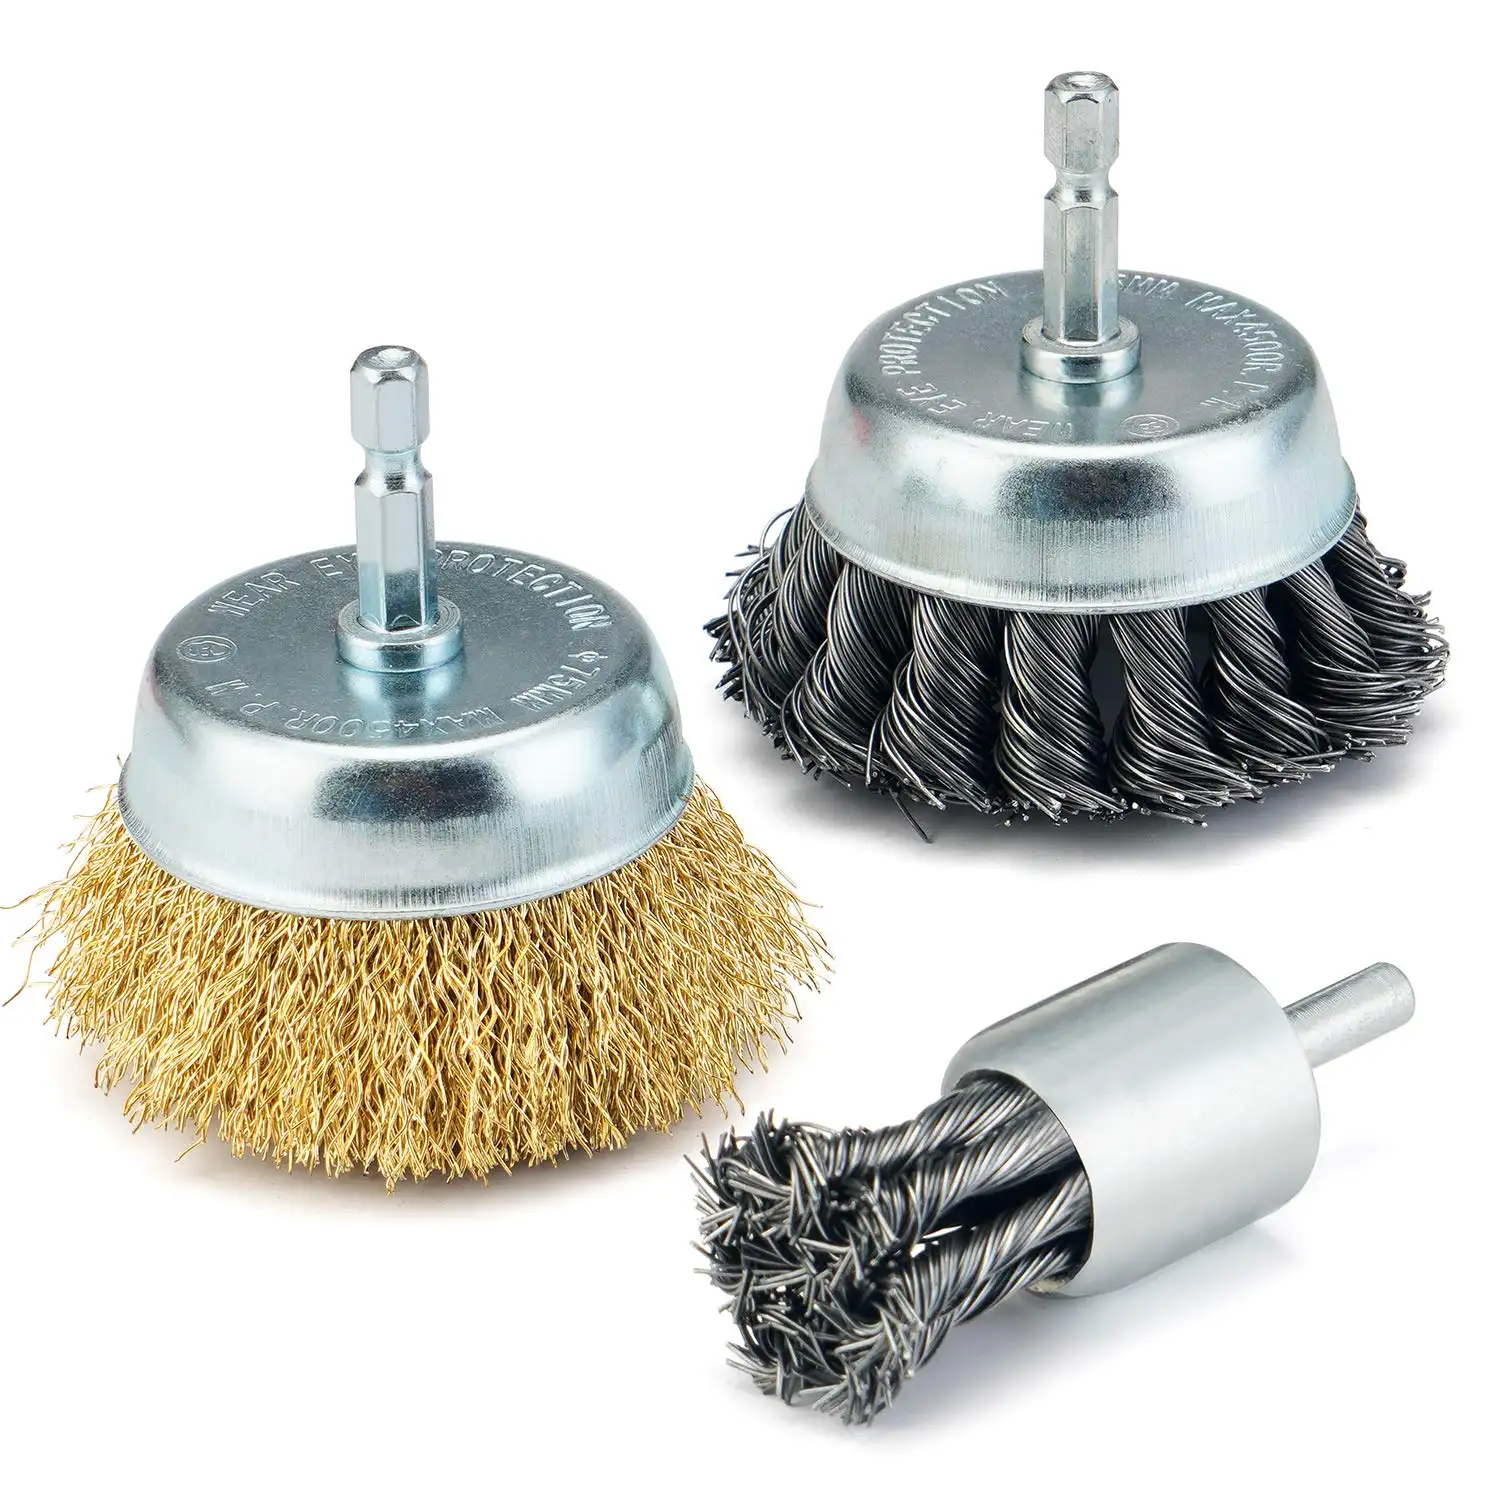 Twist Knot Wire Wheel Brush Crimped Cup Wire Wheels Brush Set with 1/4-Inch Shank For Rust Removal and Scrub Surfaces